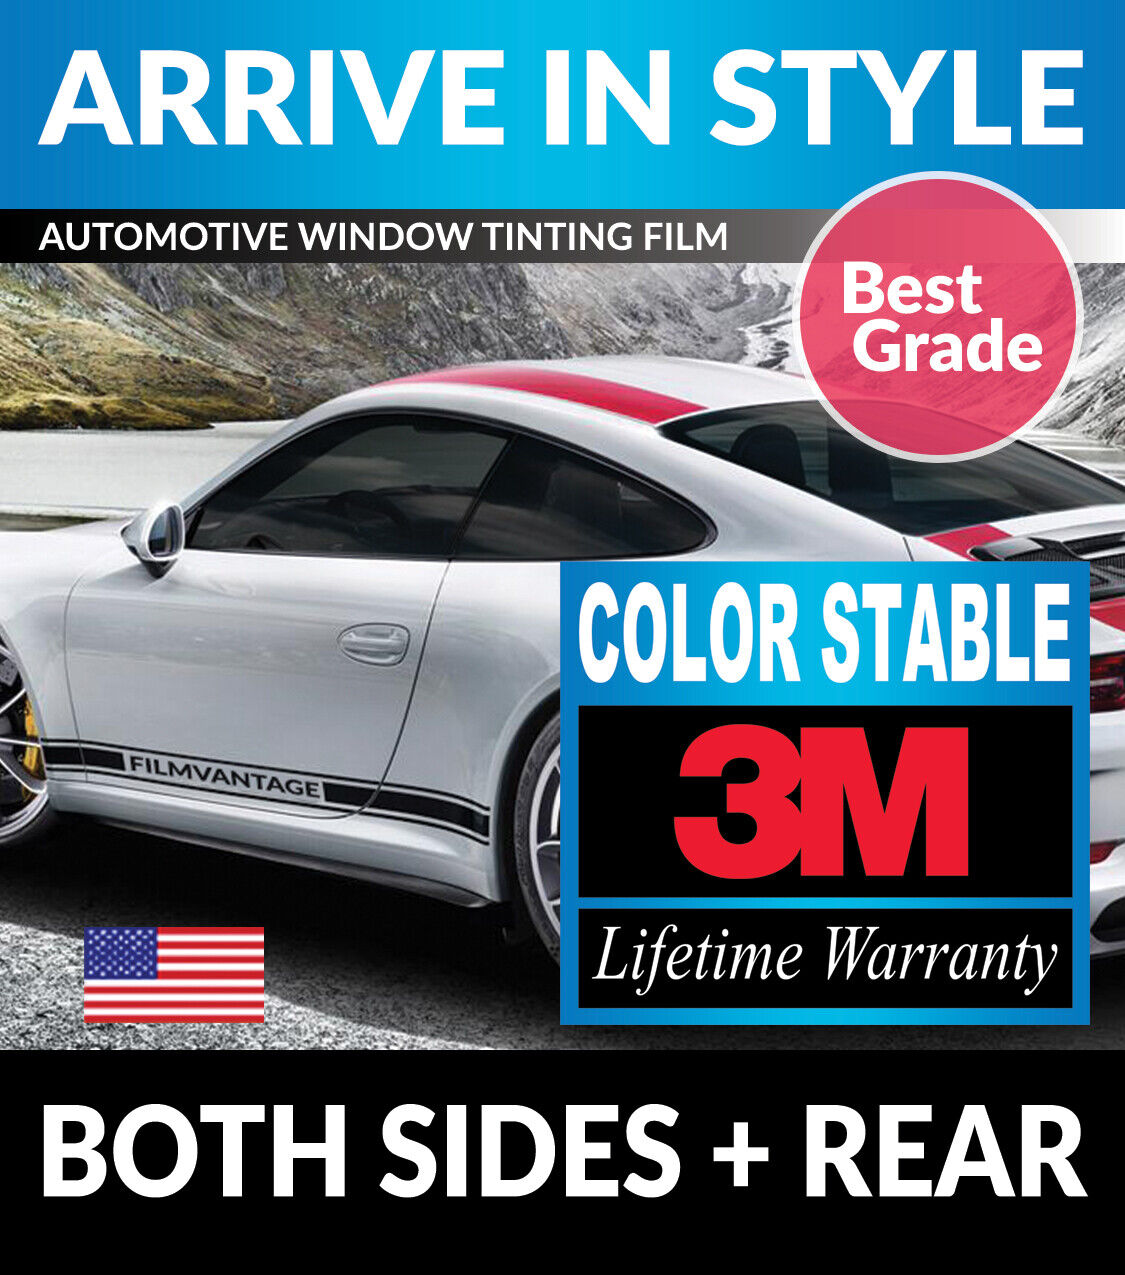 PRECUT WINDOW TINT W/ 3M COLOR STABLE FOR BMW Z4-M ROADSTER 06-08